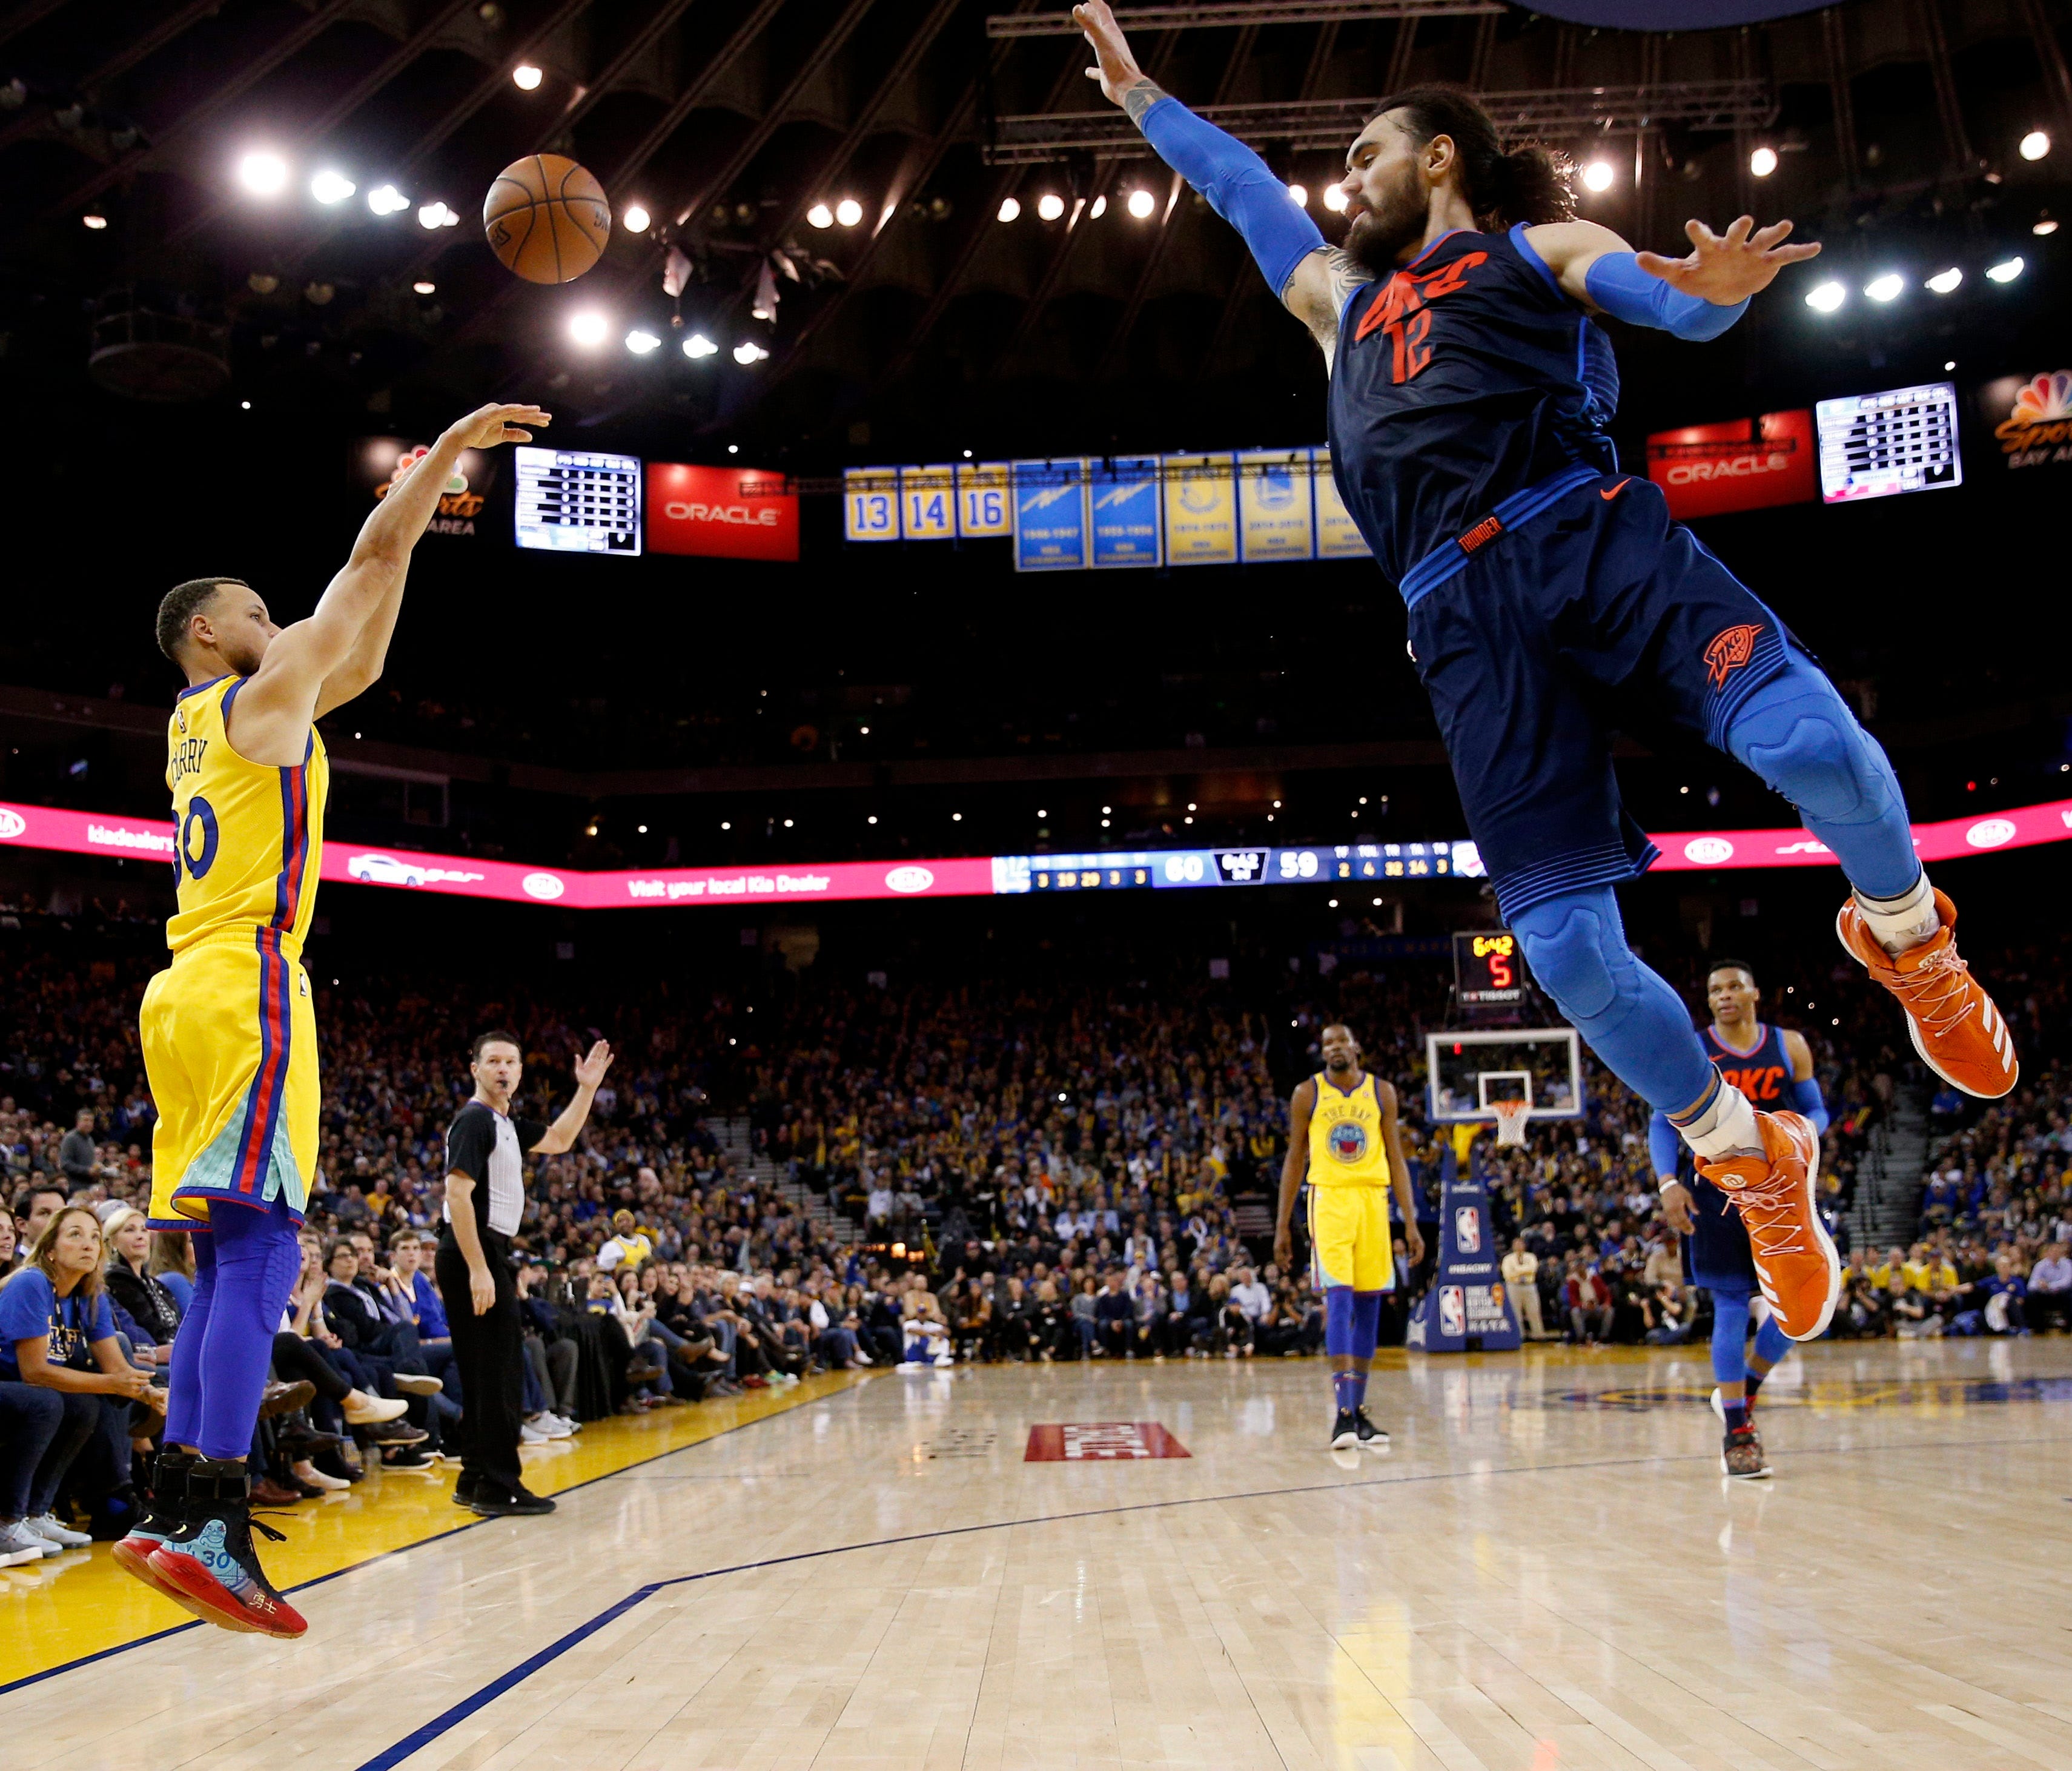 Feb. 24: Warriors guard Steph Curry shoots over Thunder defender Steven Adams during the second half in Oakland.